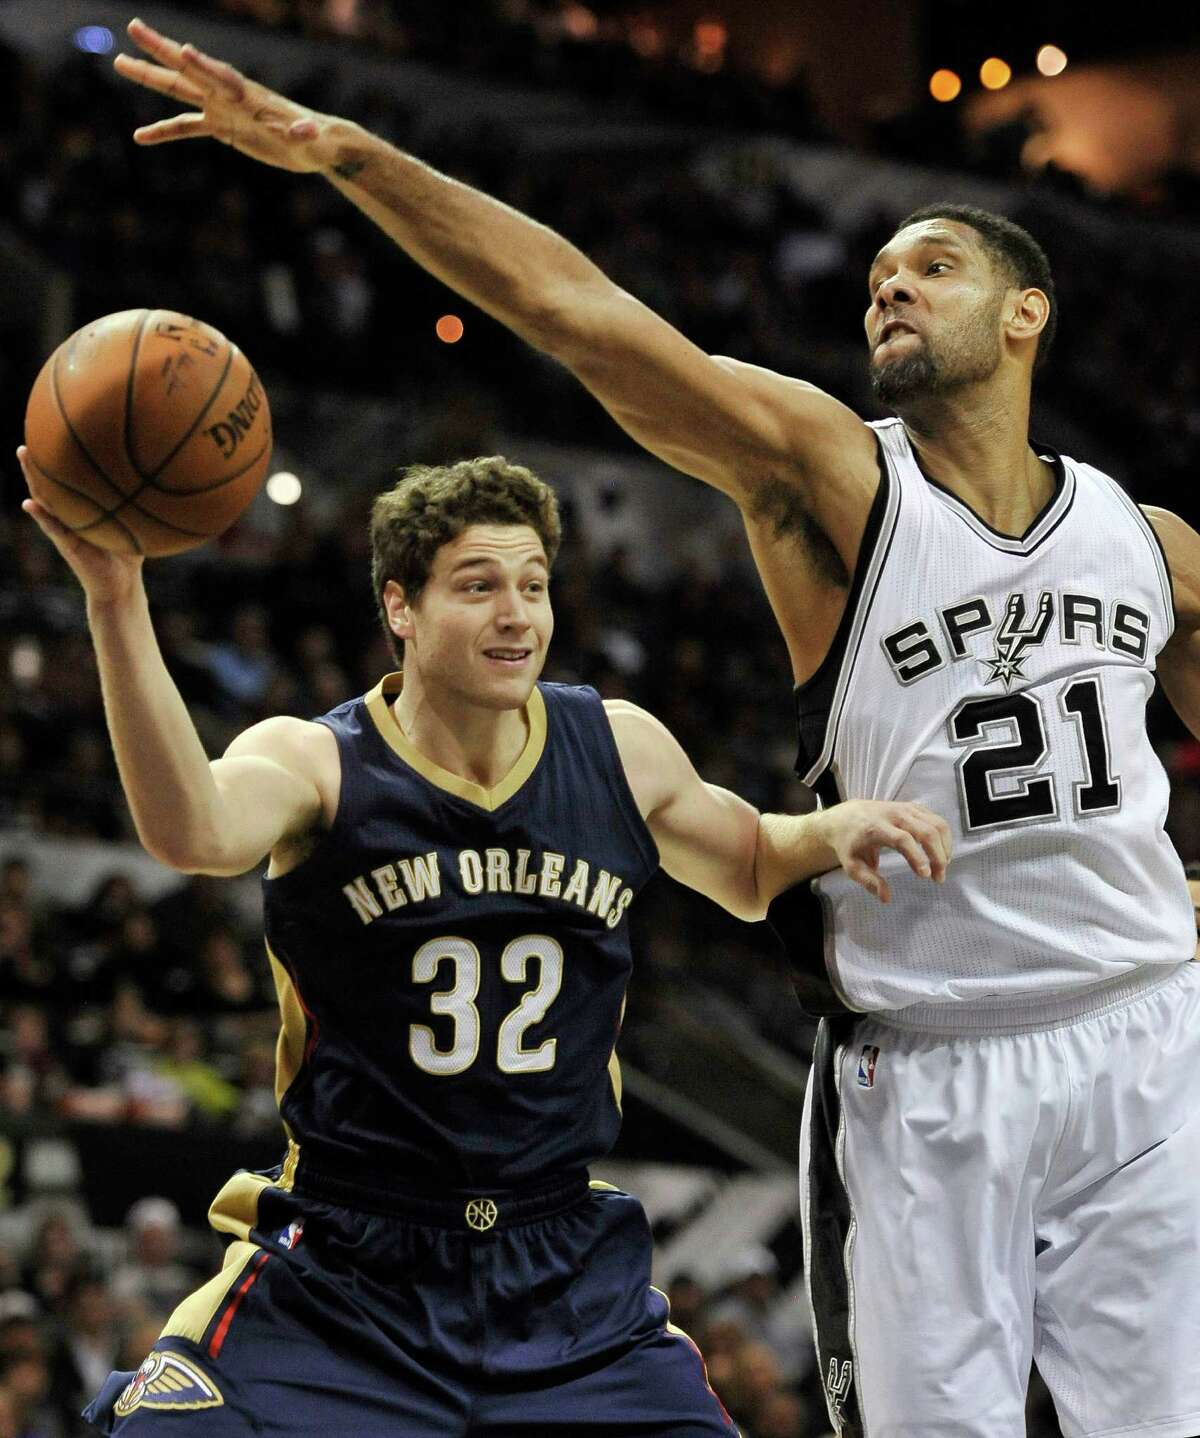 New Orleans Pelicans guard Jimmer Fredette (32) looks to pass around San Antonio Spurs forward Tim Duncan in the second half of an NBA basketball game, Wednesday, Dec. 31, 2014, in San Antonio. San Antonio won 95-93 in overtime. (AP Photo/Darren Abate)